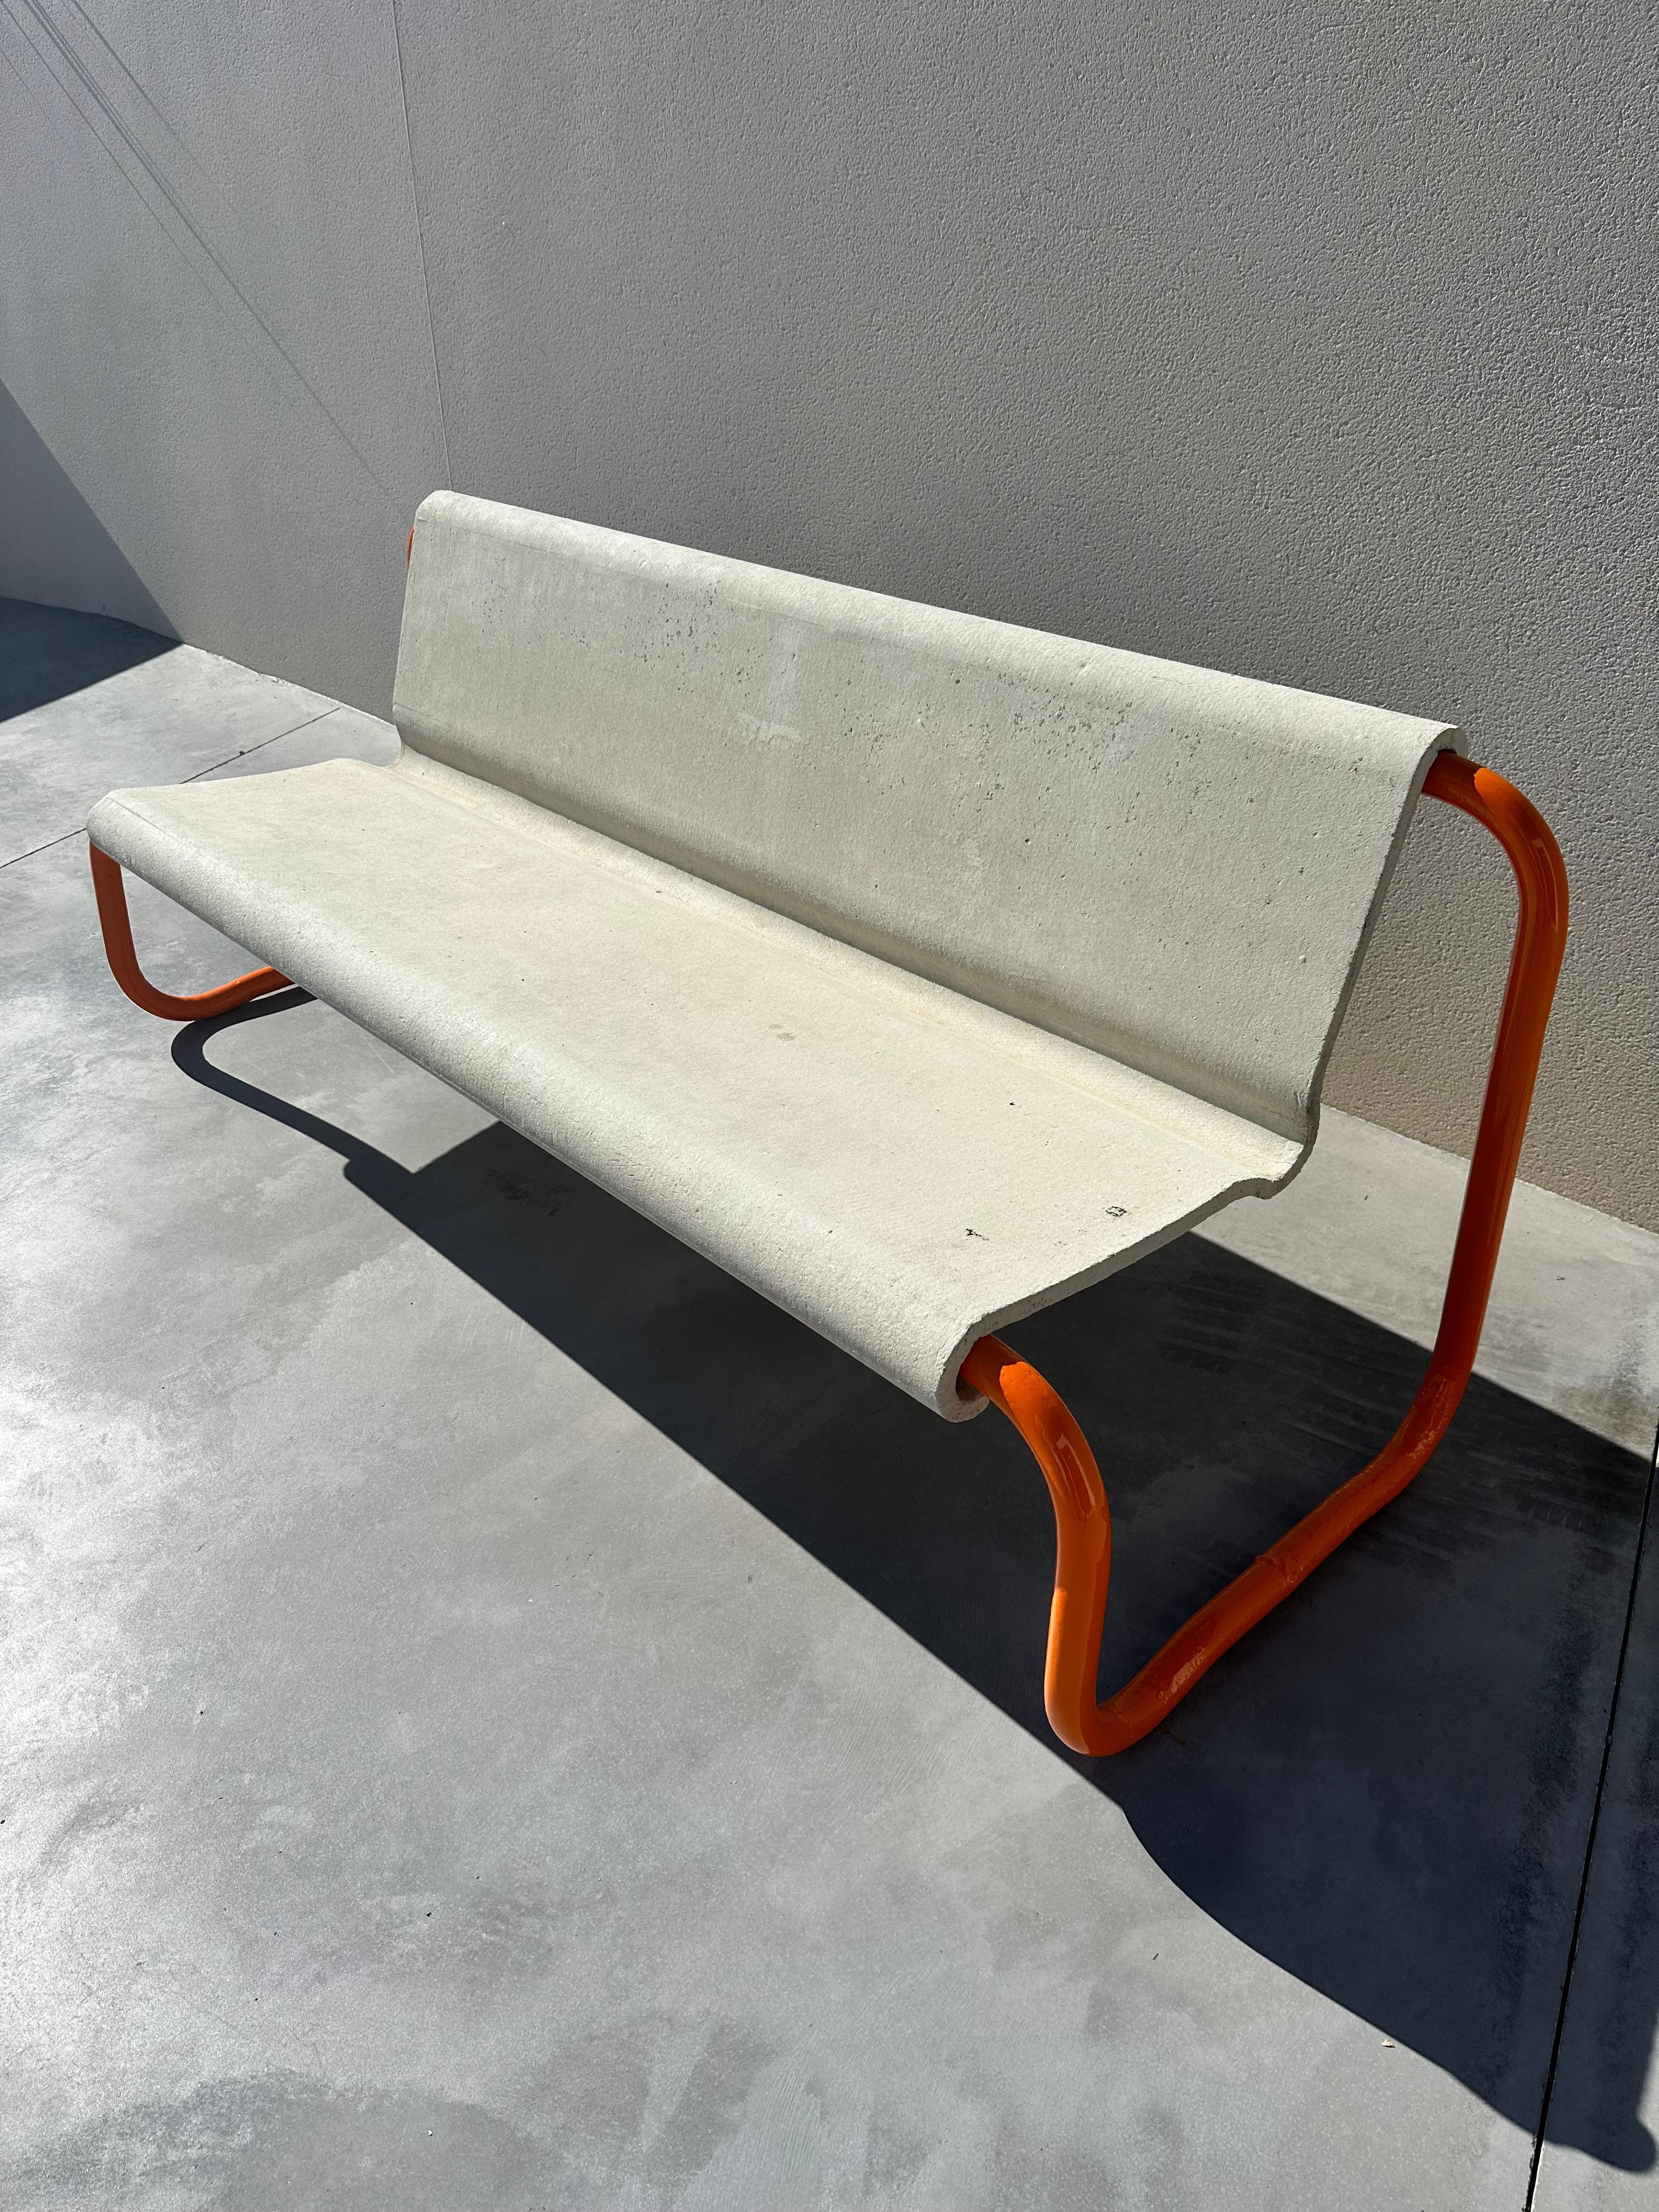 Willy Guhl Steel and Concrete Design Bench, Switzerland, 1950s For Sale 1